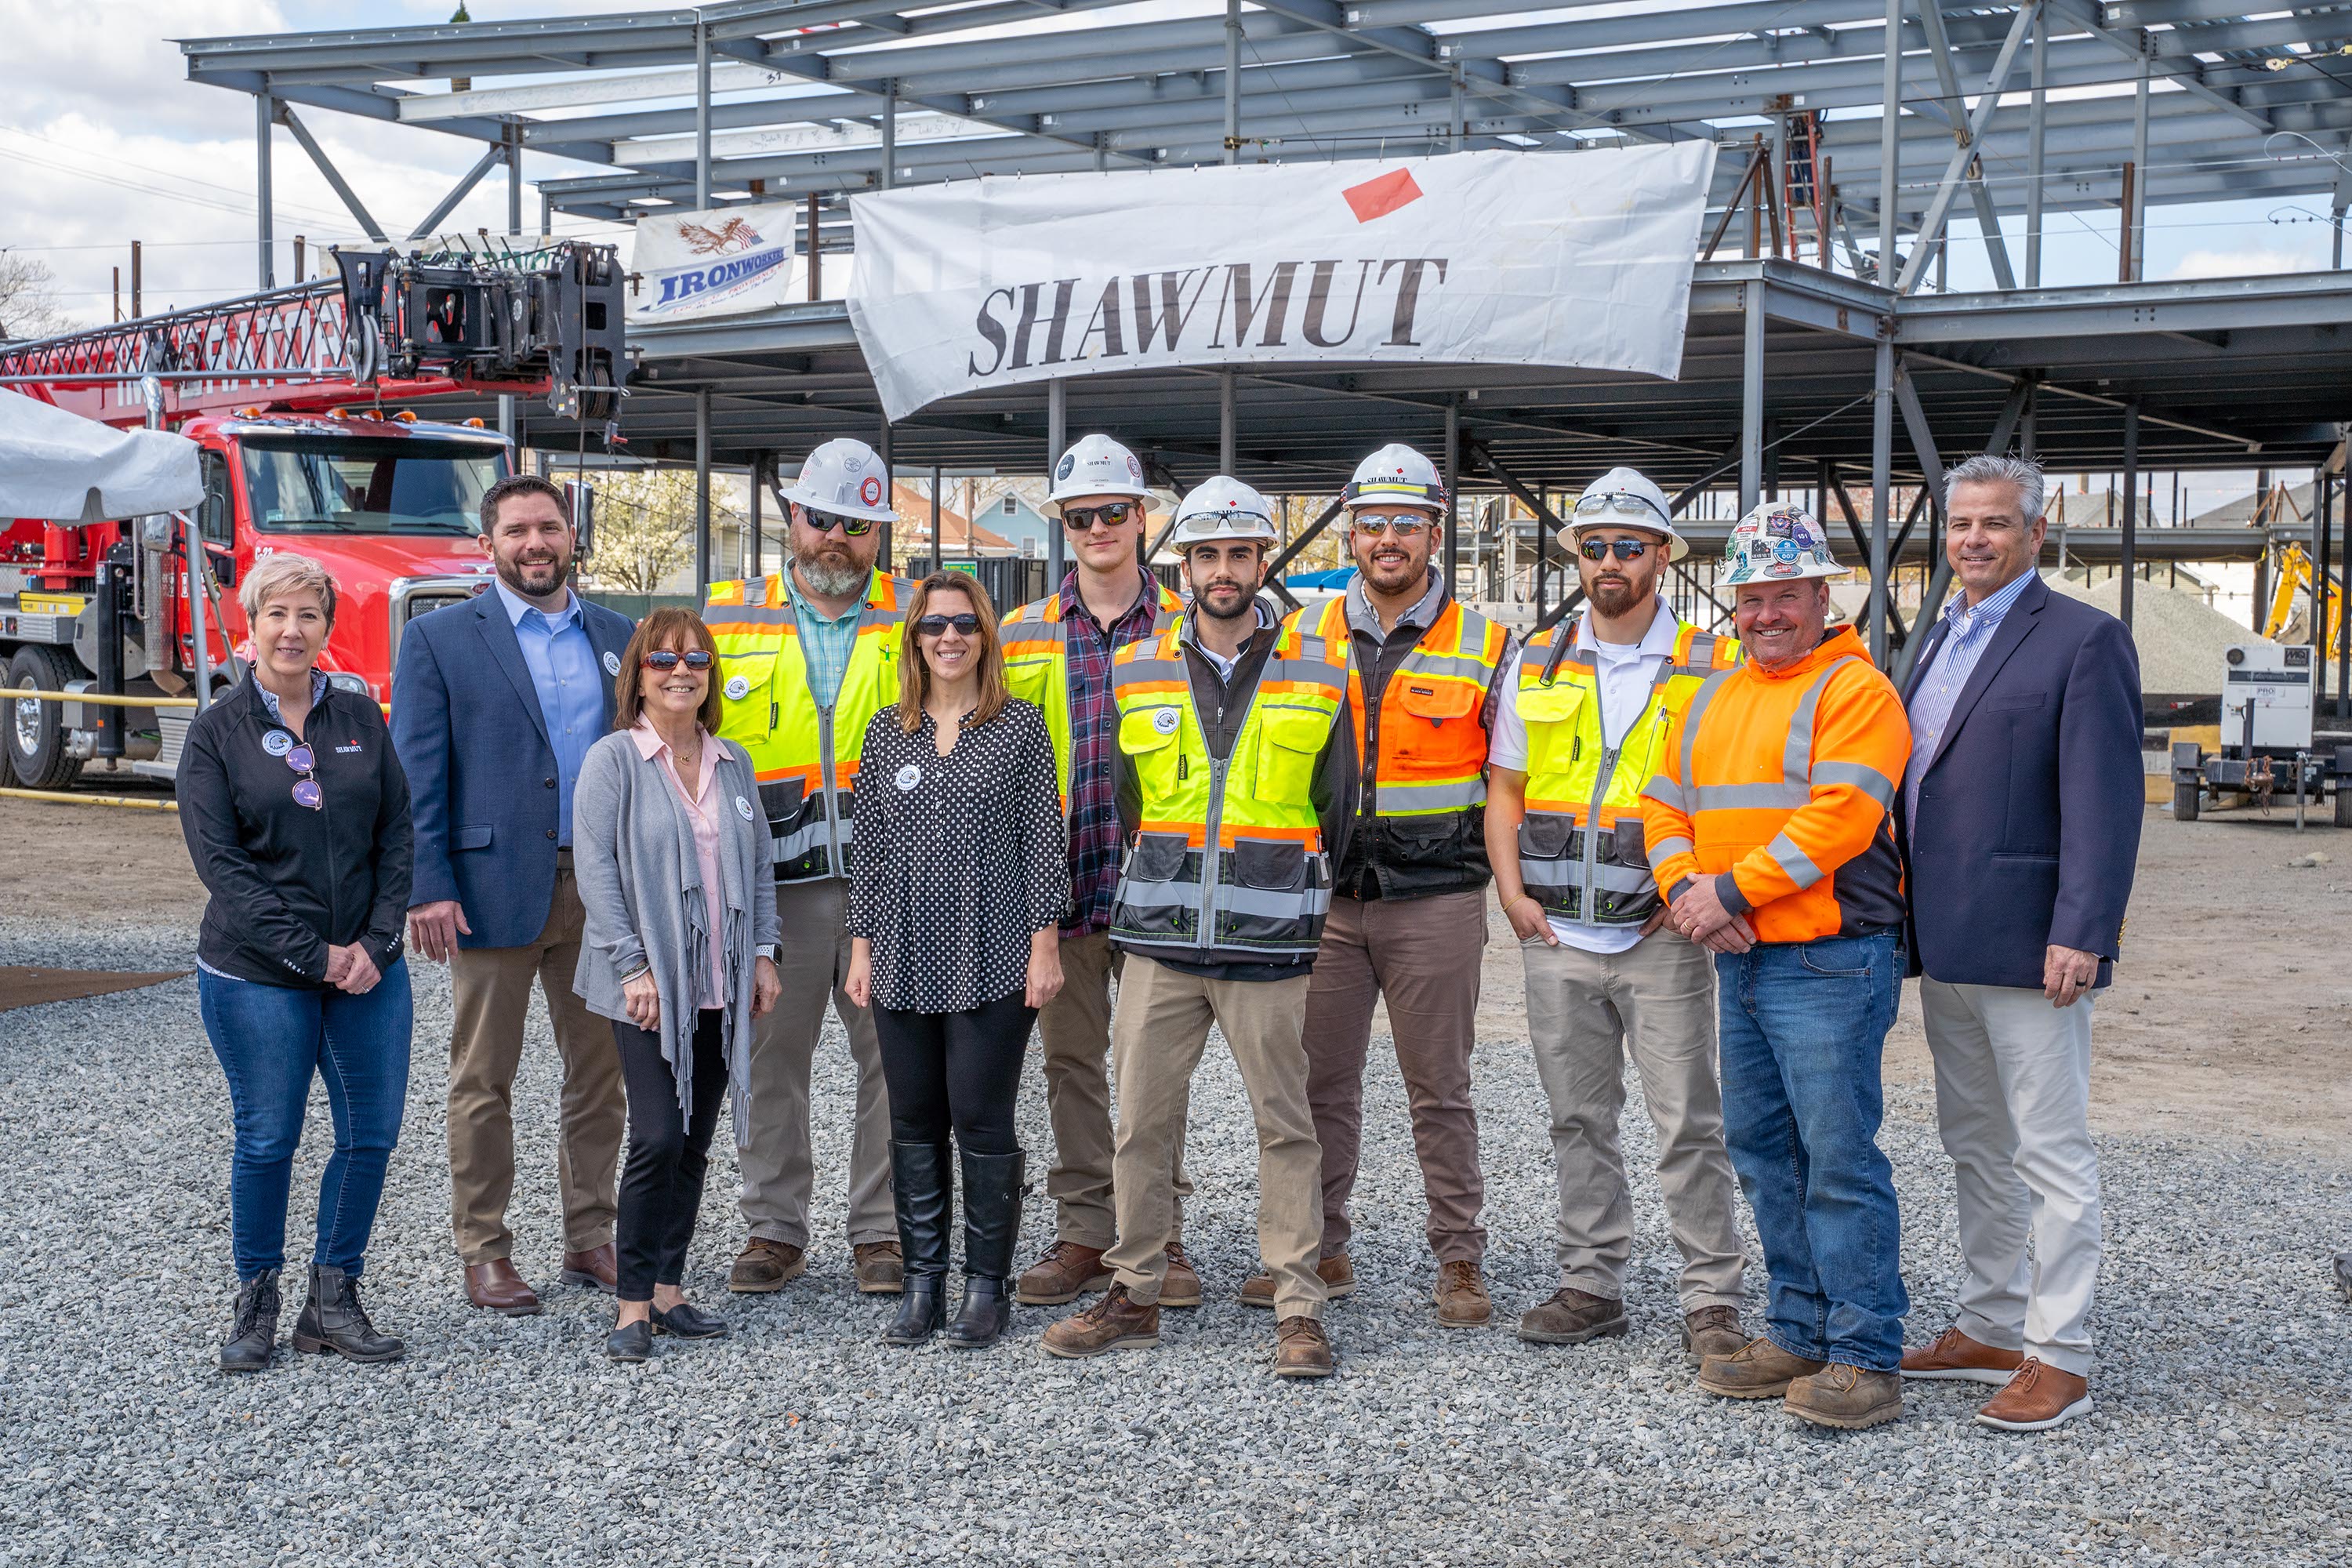 Shawmut Design and Construction, Pawtucket School Department, and Colliers Project Leaders celebrate topping off on Baldwin Elementary School